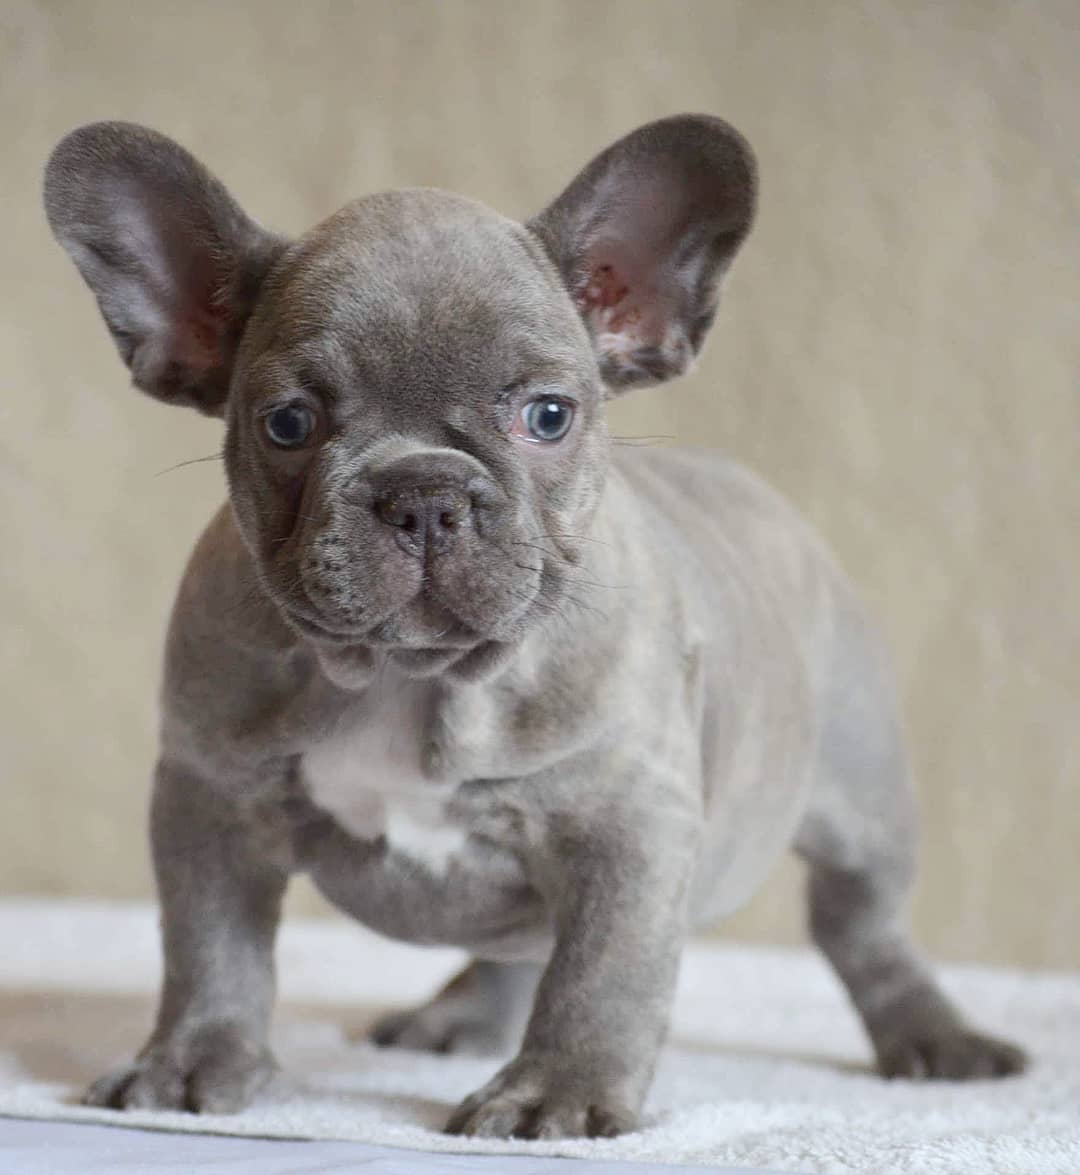 Lilac French Bulldog-What Do You Need To Know?